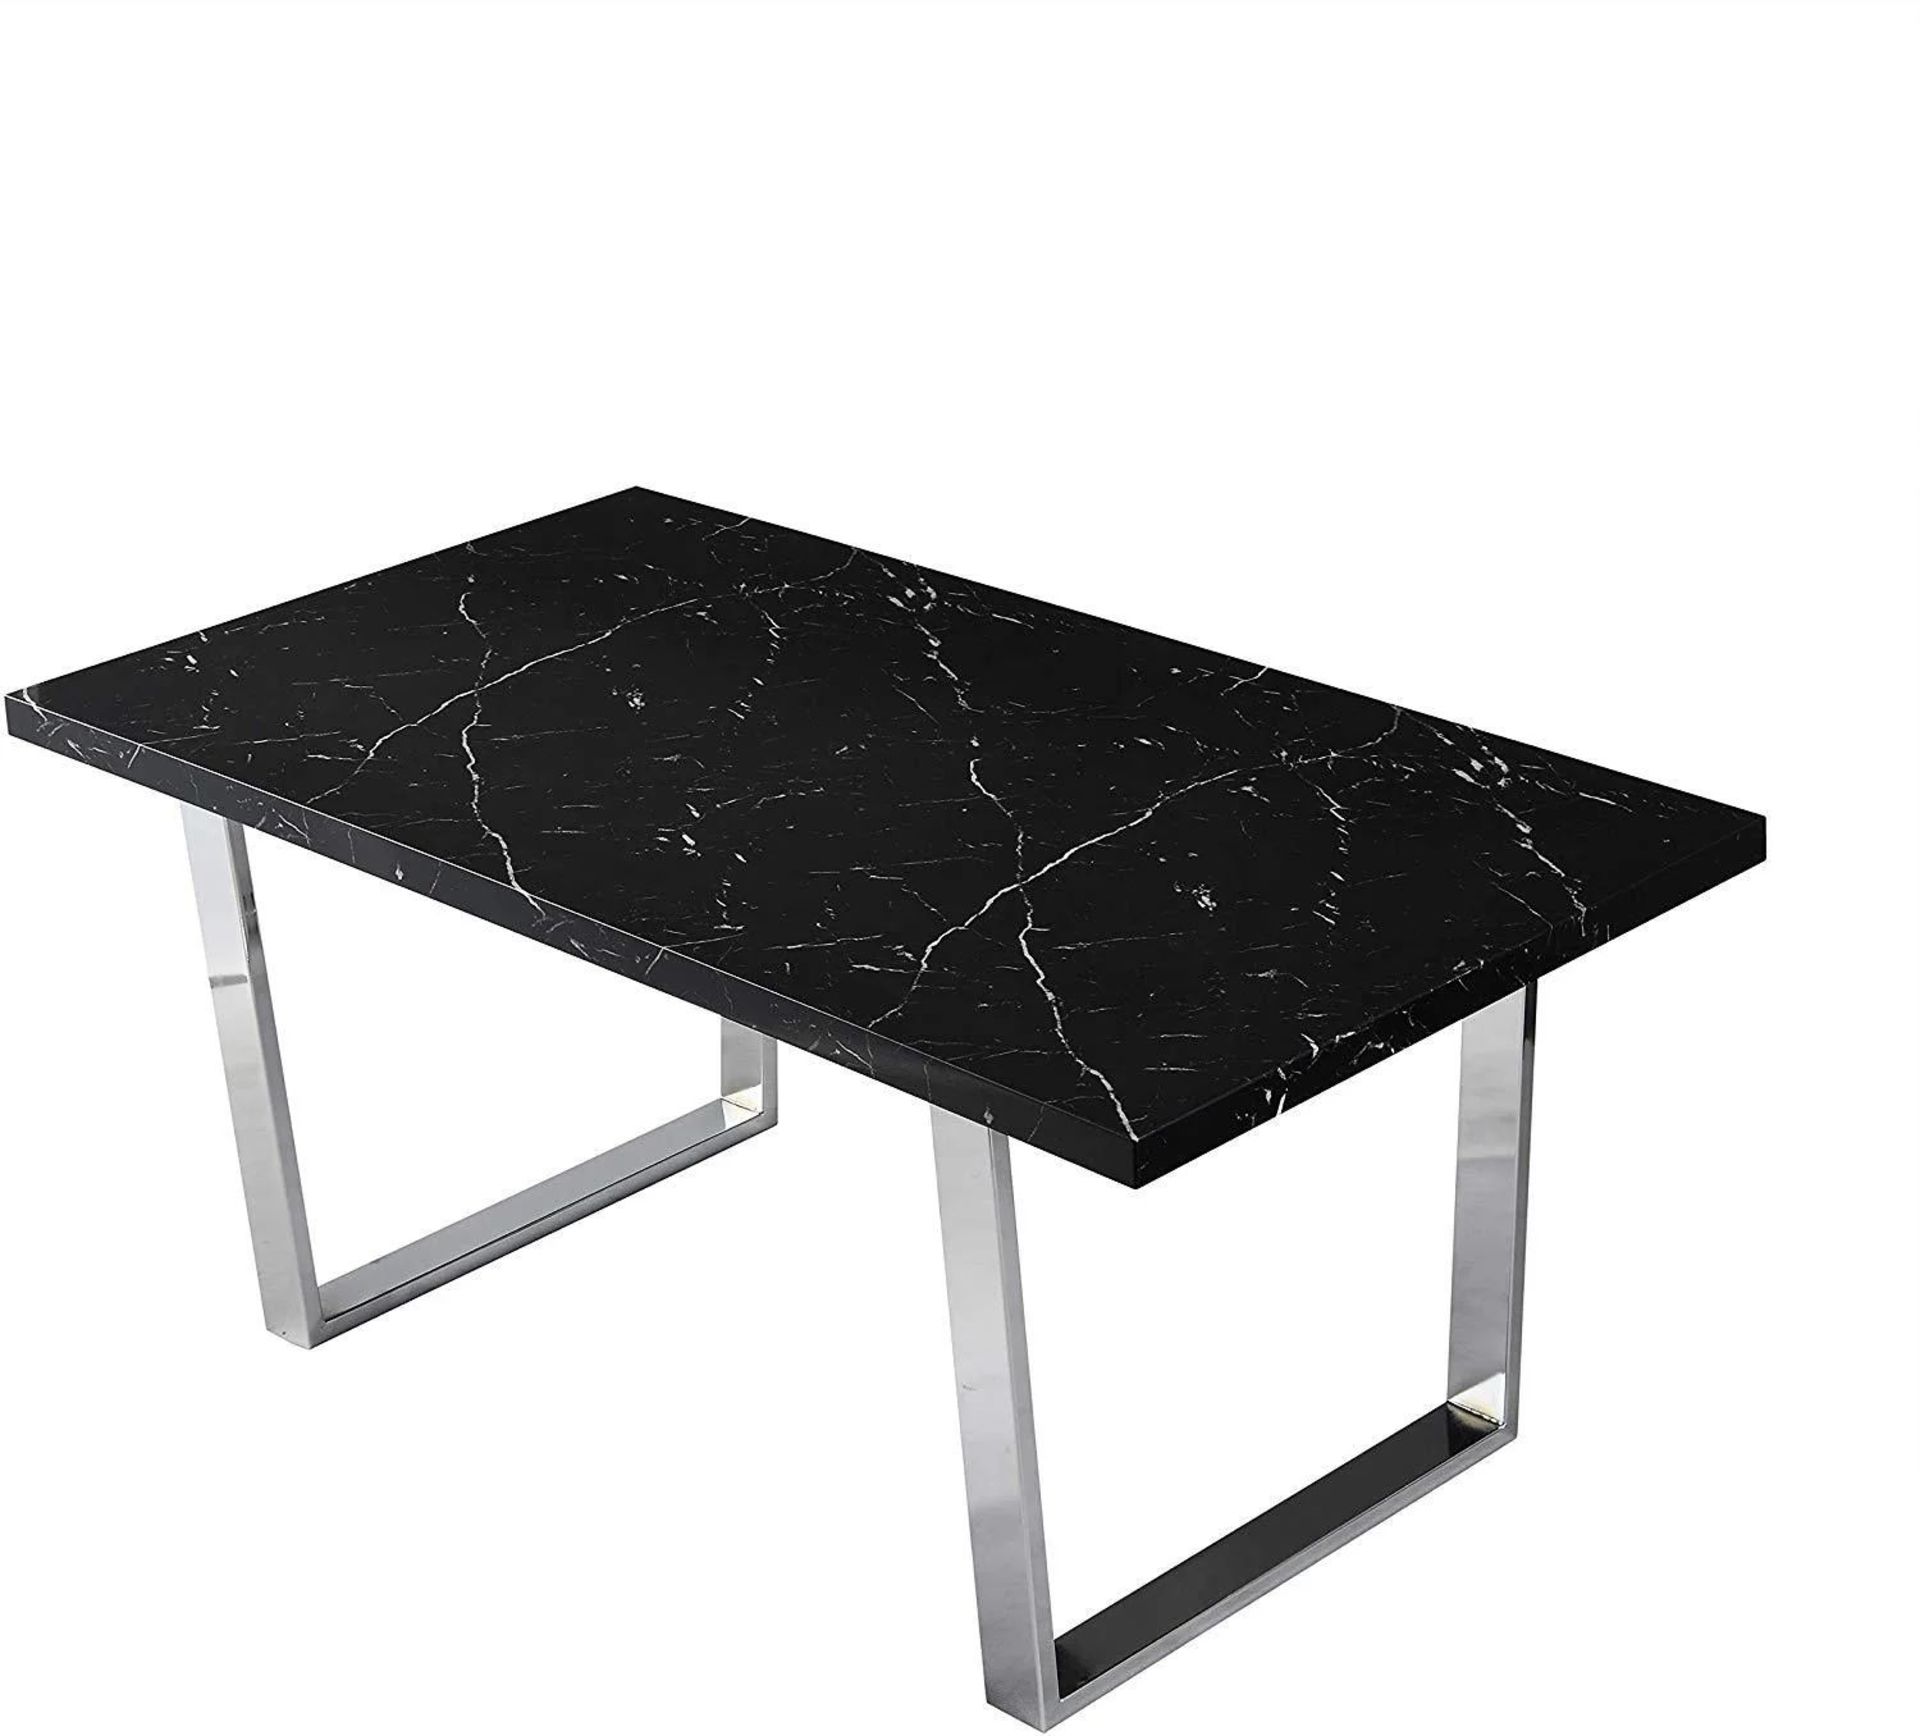 BIASCA 6-Seater High Gloss Marble Effect Dining Table with Silver Chrome Legs Black. BI. RRP £359. - Image 2 of 2